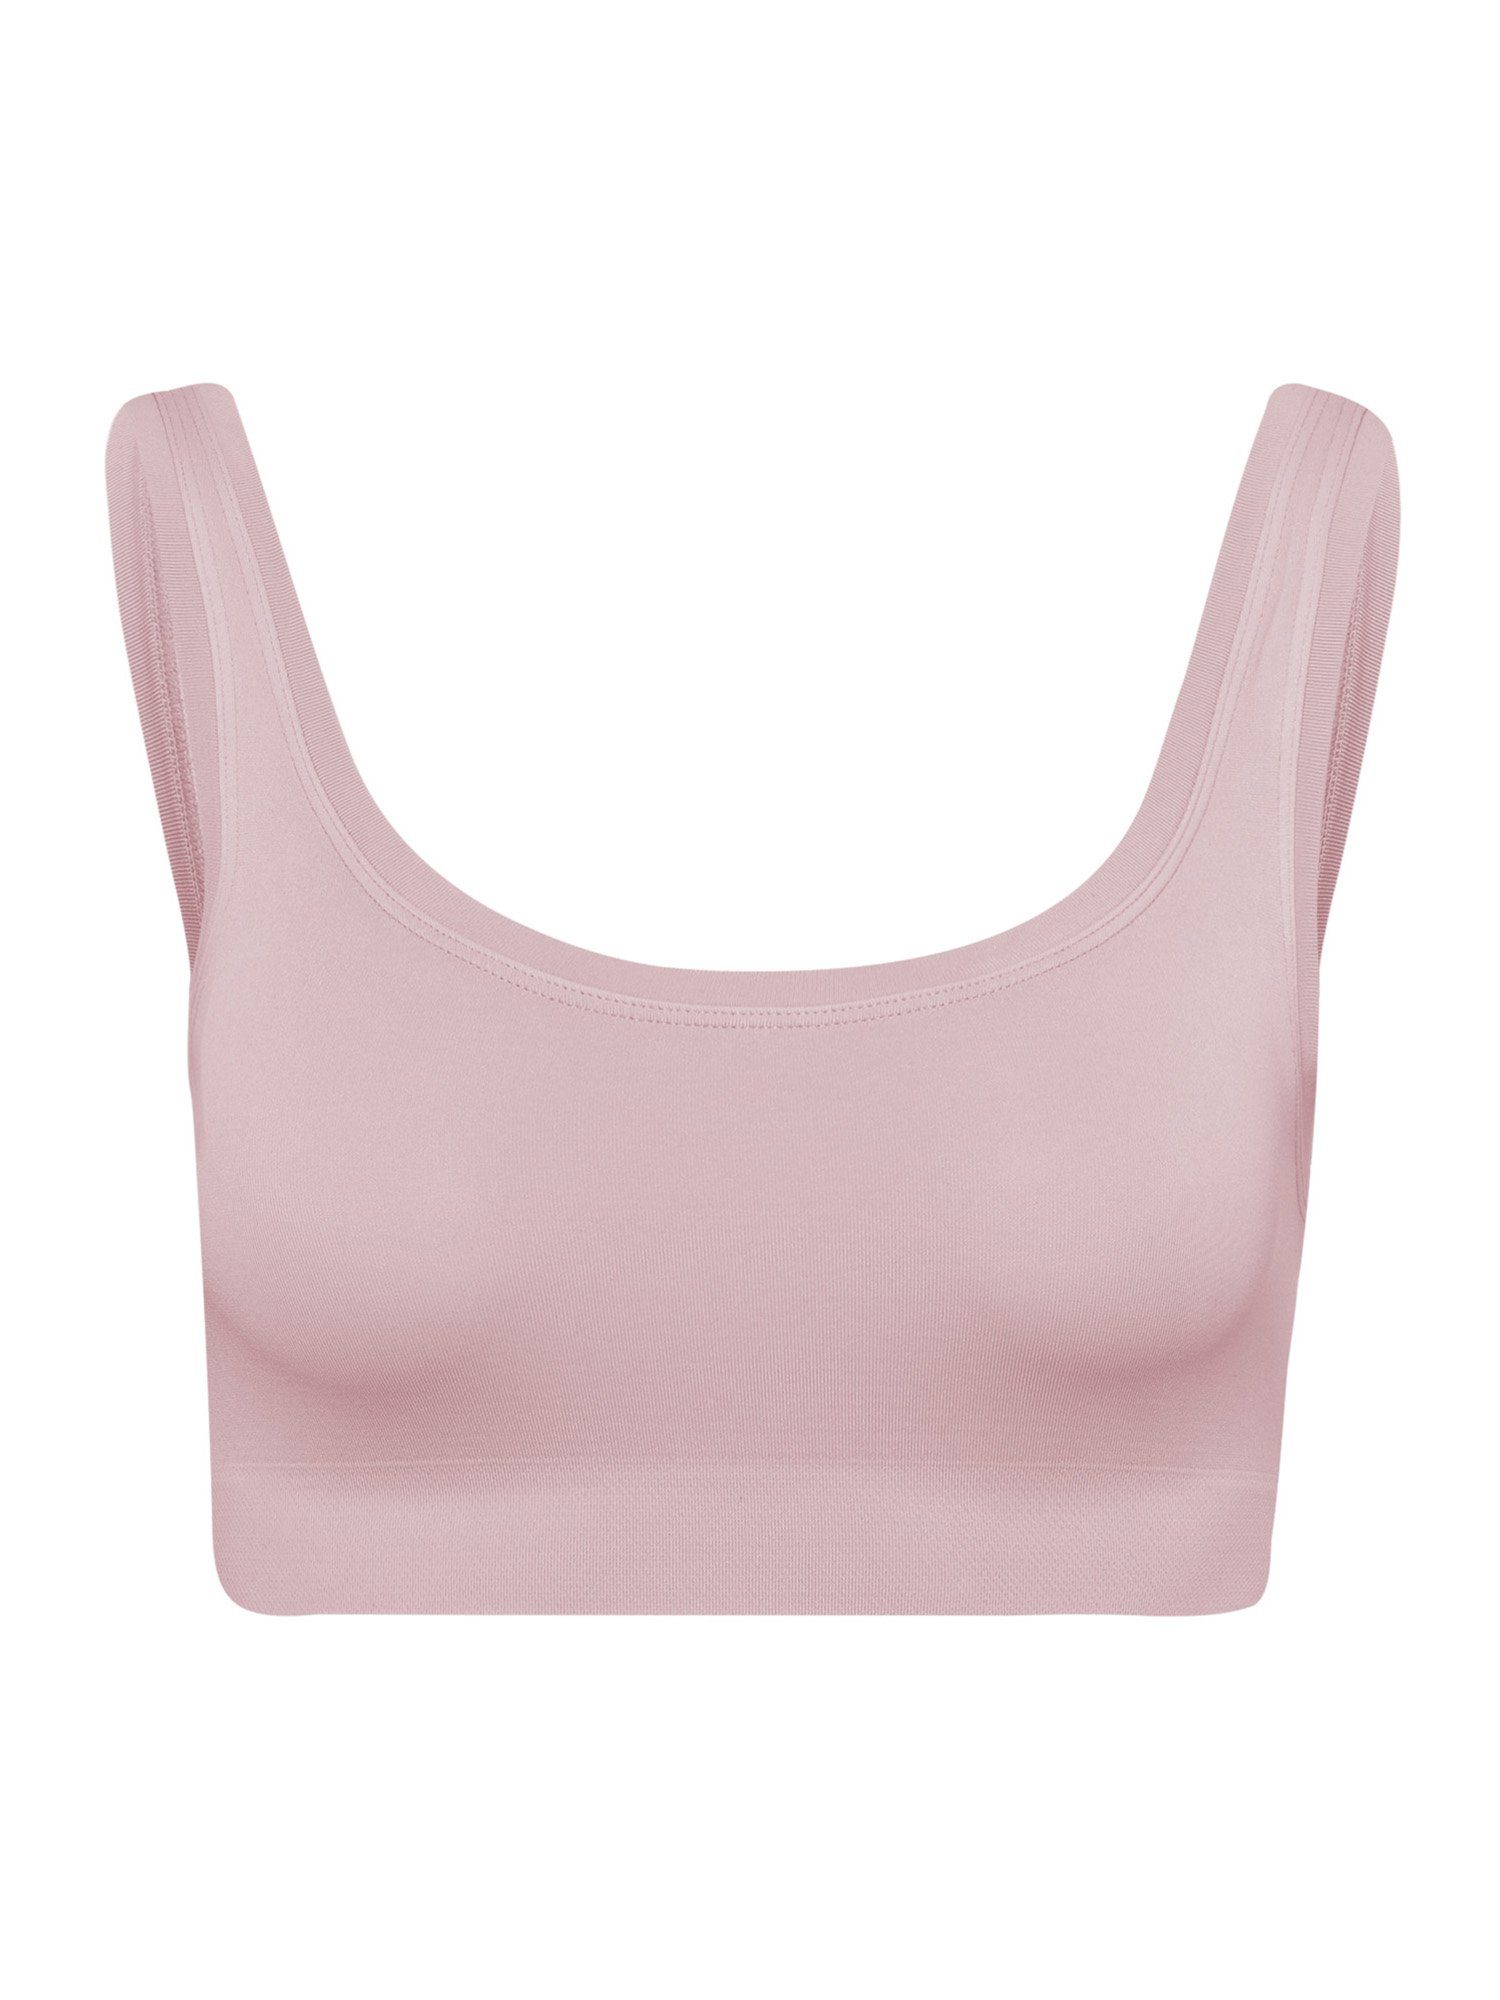 Hanro Bustier Touch crepe pink Feeling